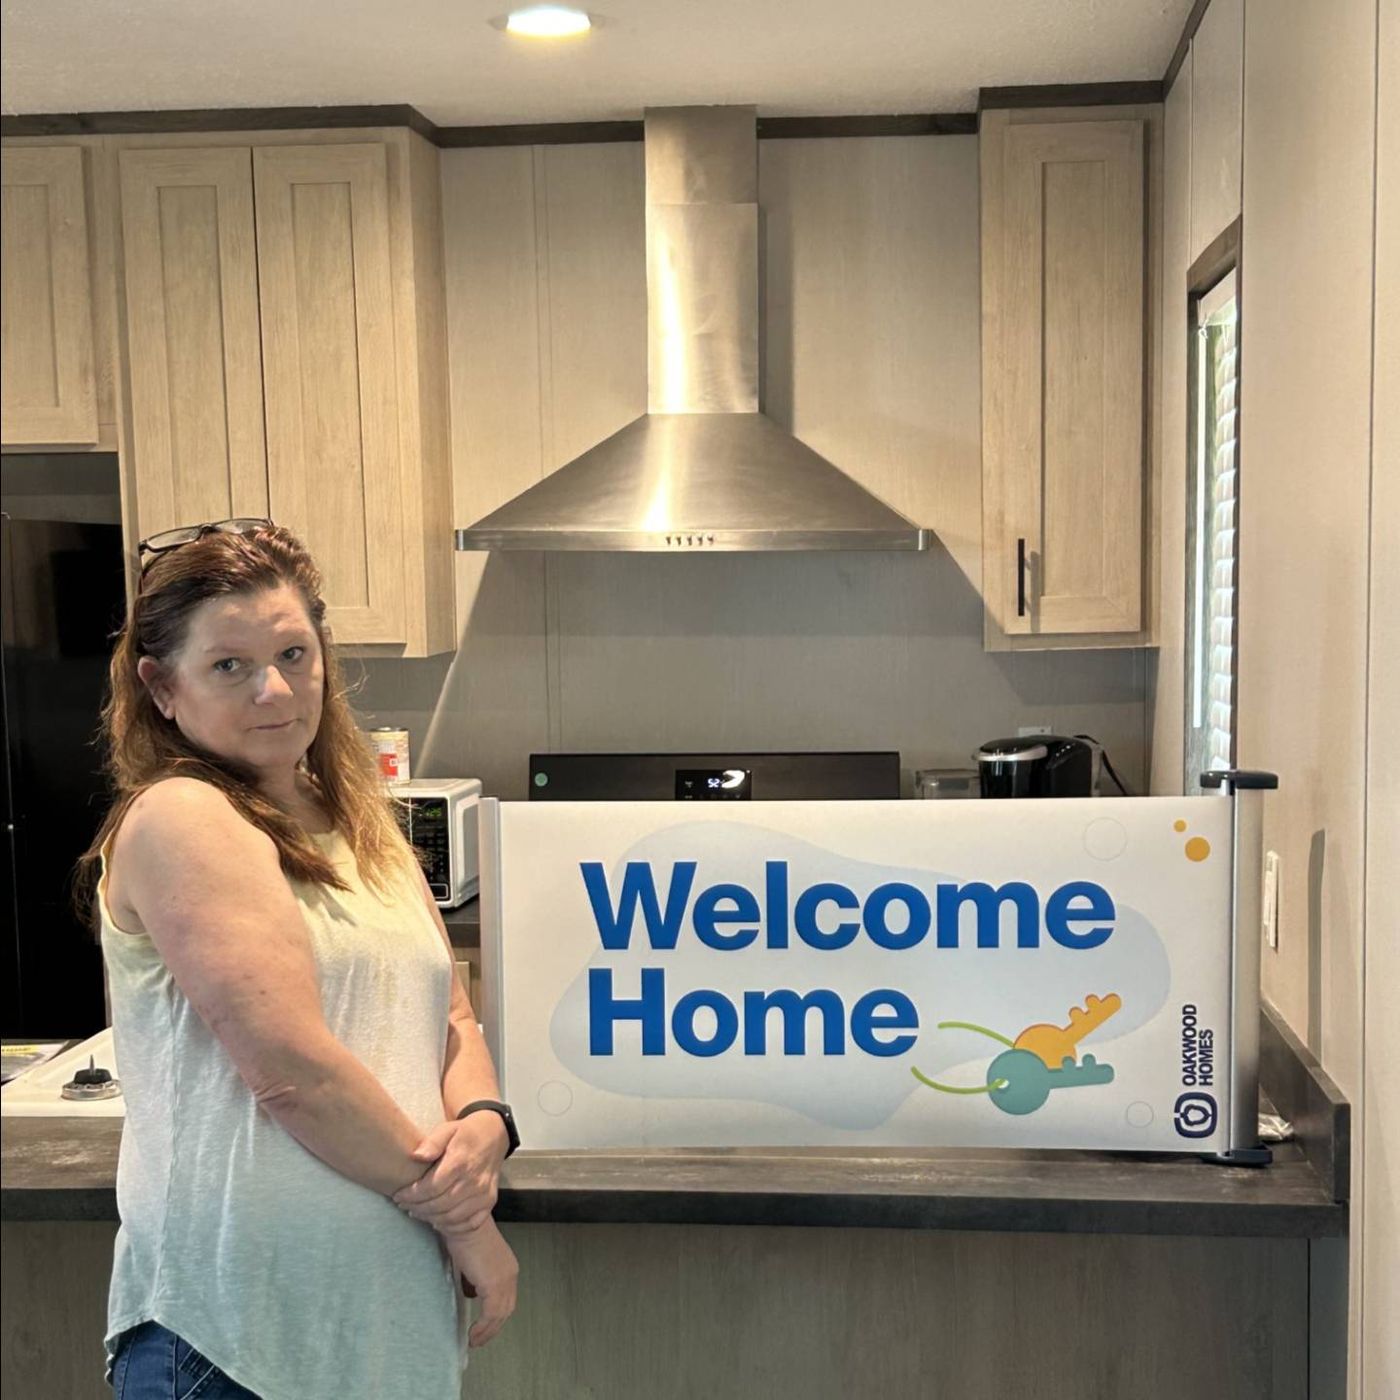 CHRISTIE T. welcome home image